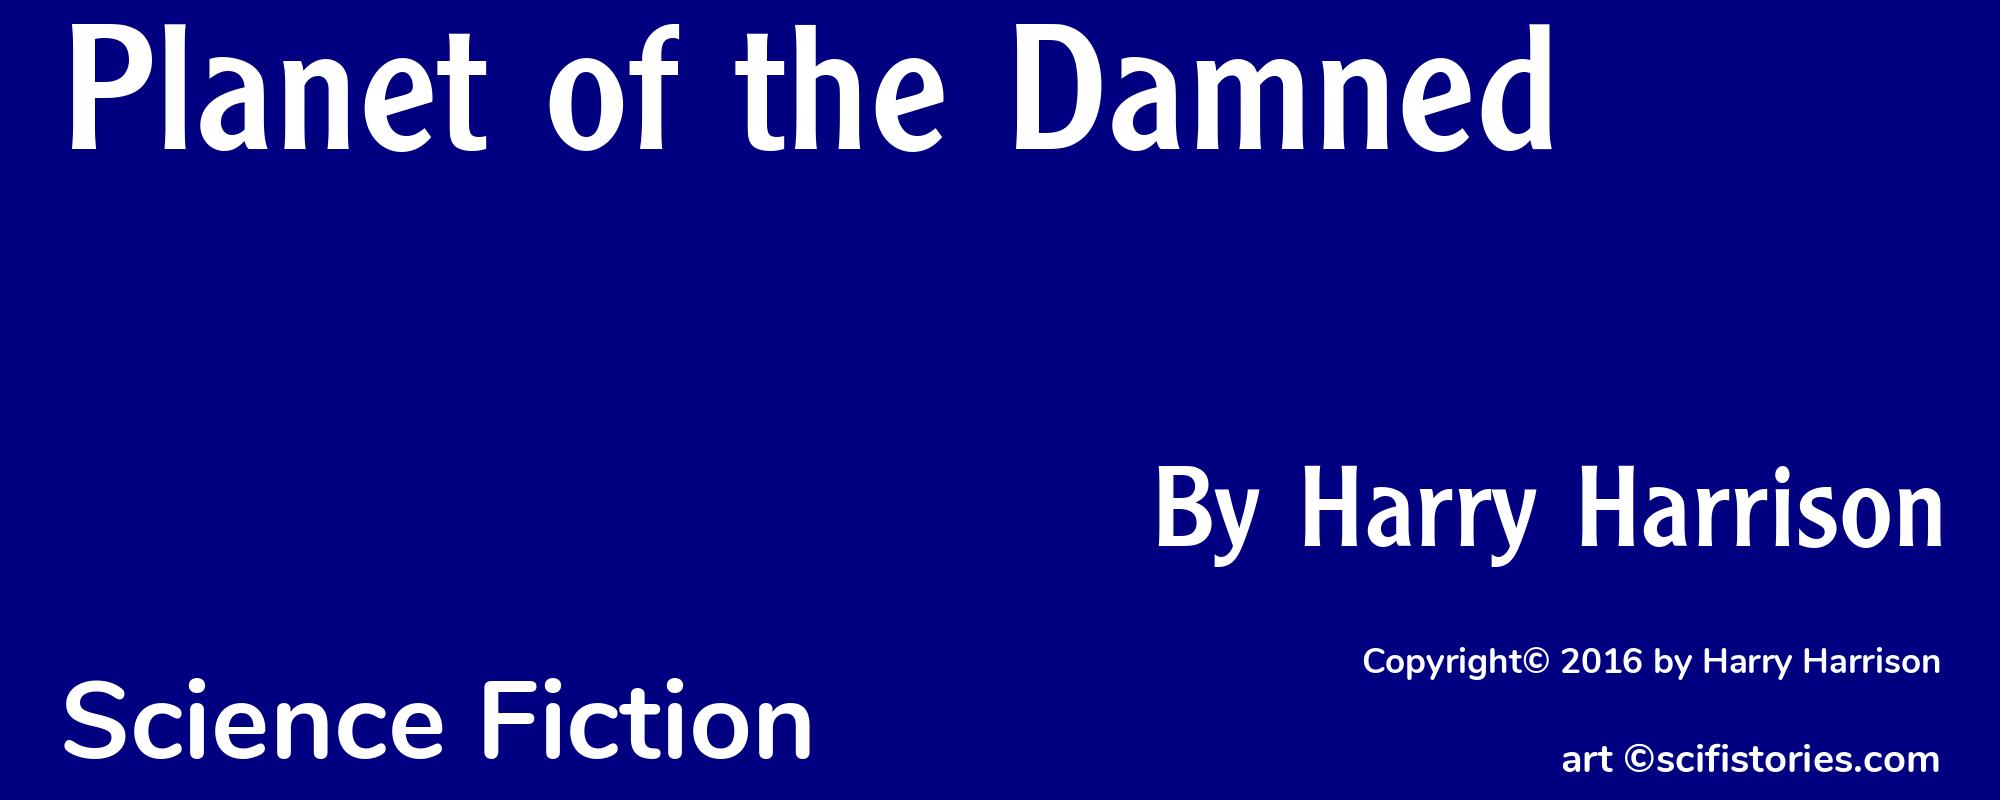 Planet of the Damned - Cover